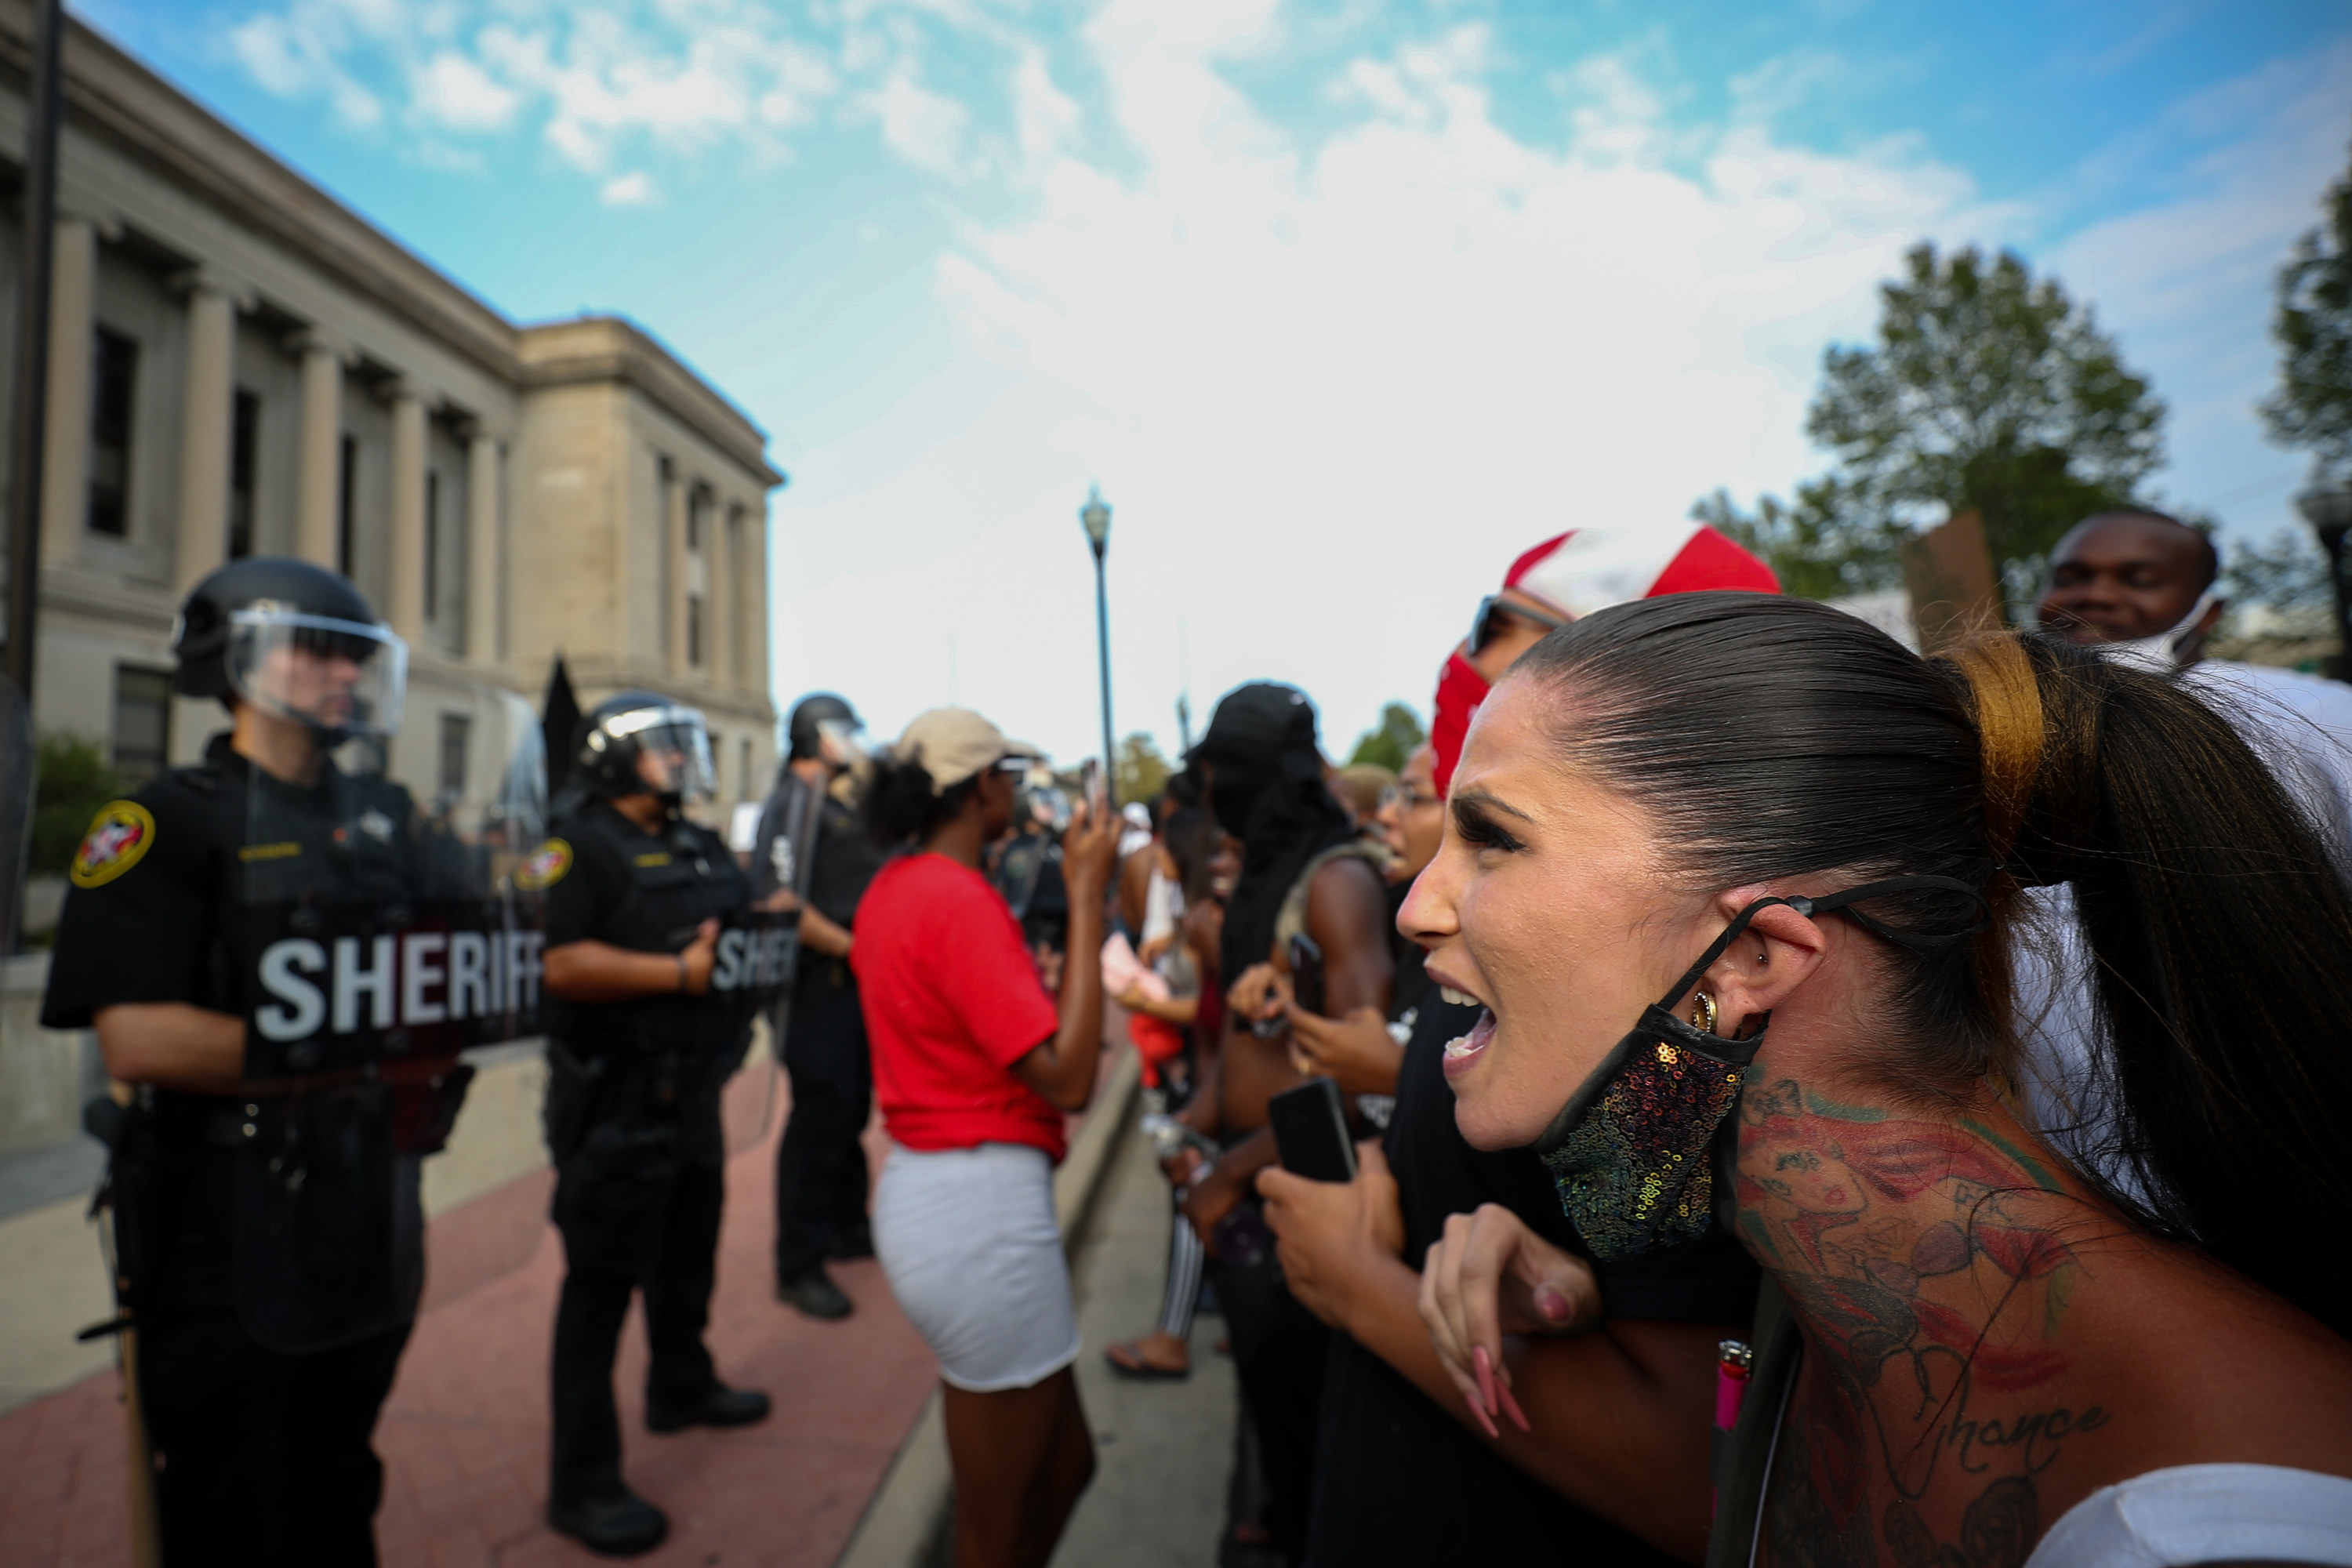 A white woman yells while linking arms with other protesters in front of a line of police in riot gear